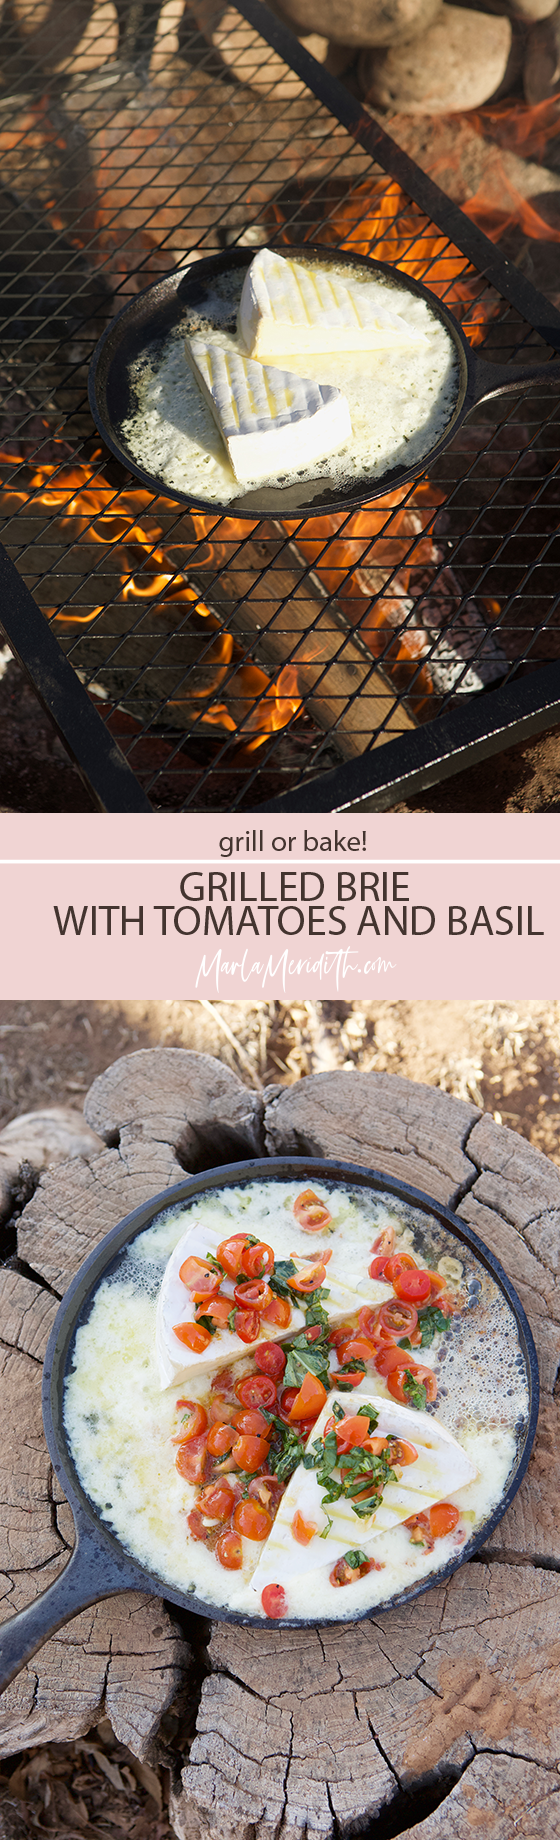 Grilled BriGrilled Brie with Tomatoes and Basil recipee with Tomatoes and Basil recipe